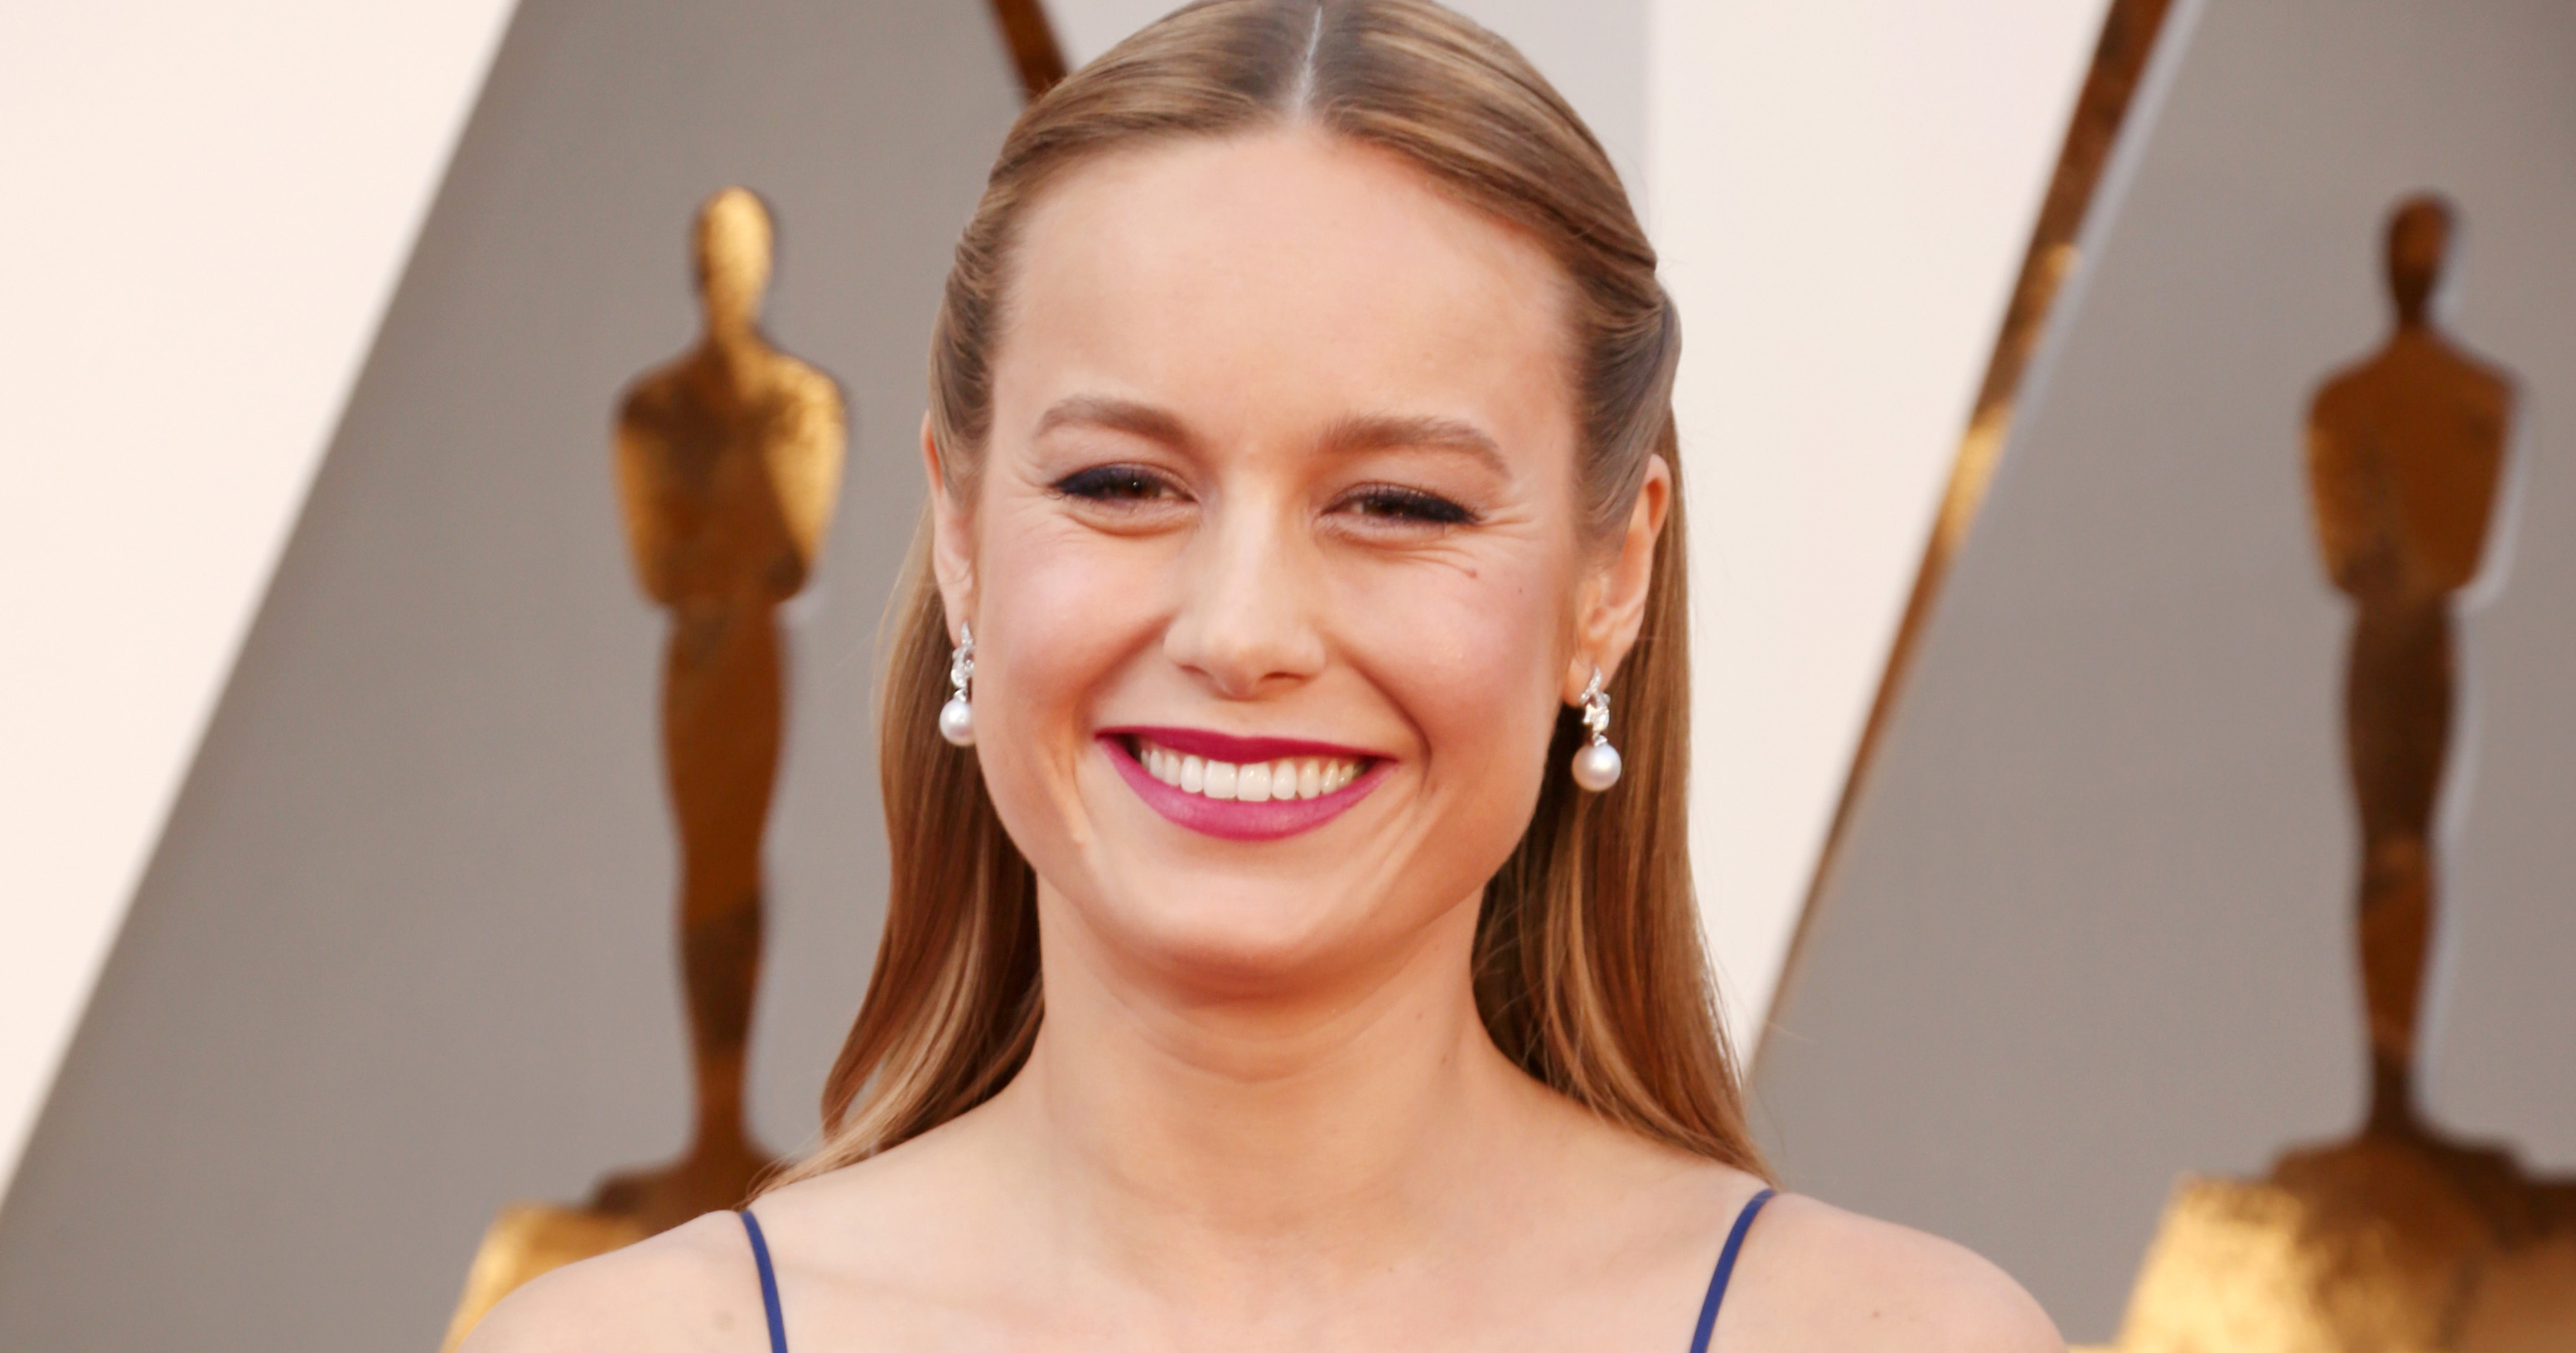 Brie Larson attends the 88th Annual Academy Awards on Feb. 28, 2016 in Hollywood, Calif. (Todd Williamson—Getty Images)